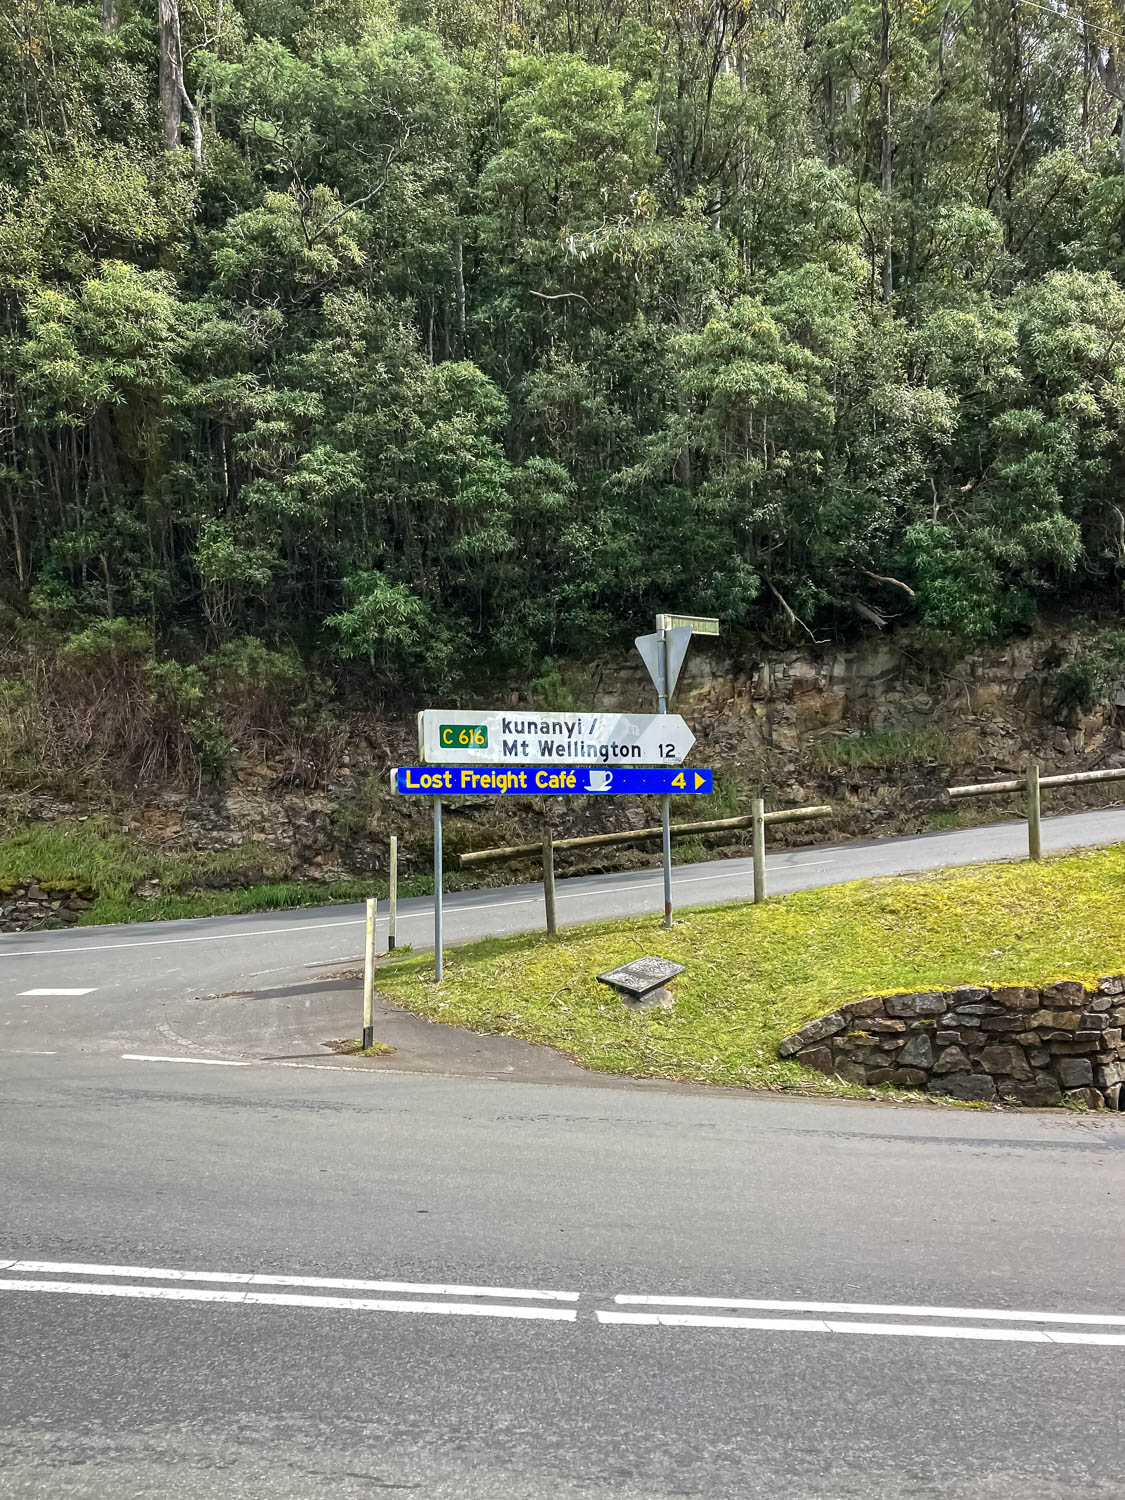 A junction of two roads, one going back to the right with a sign pointing to kunanyi/Mt Wellington 12 km. There are trees in the background